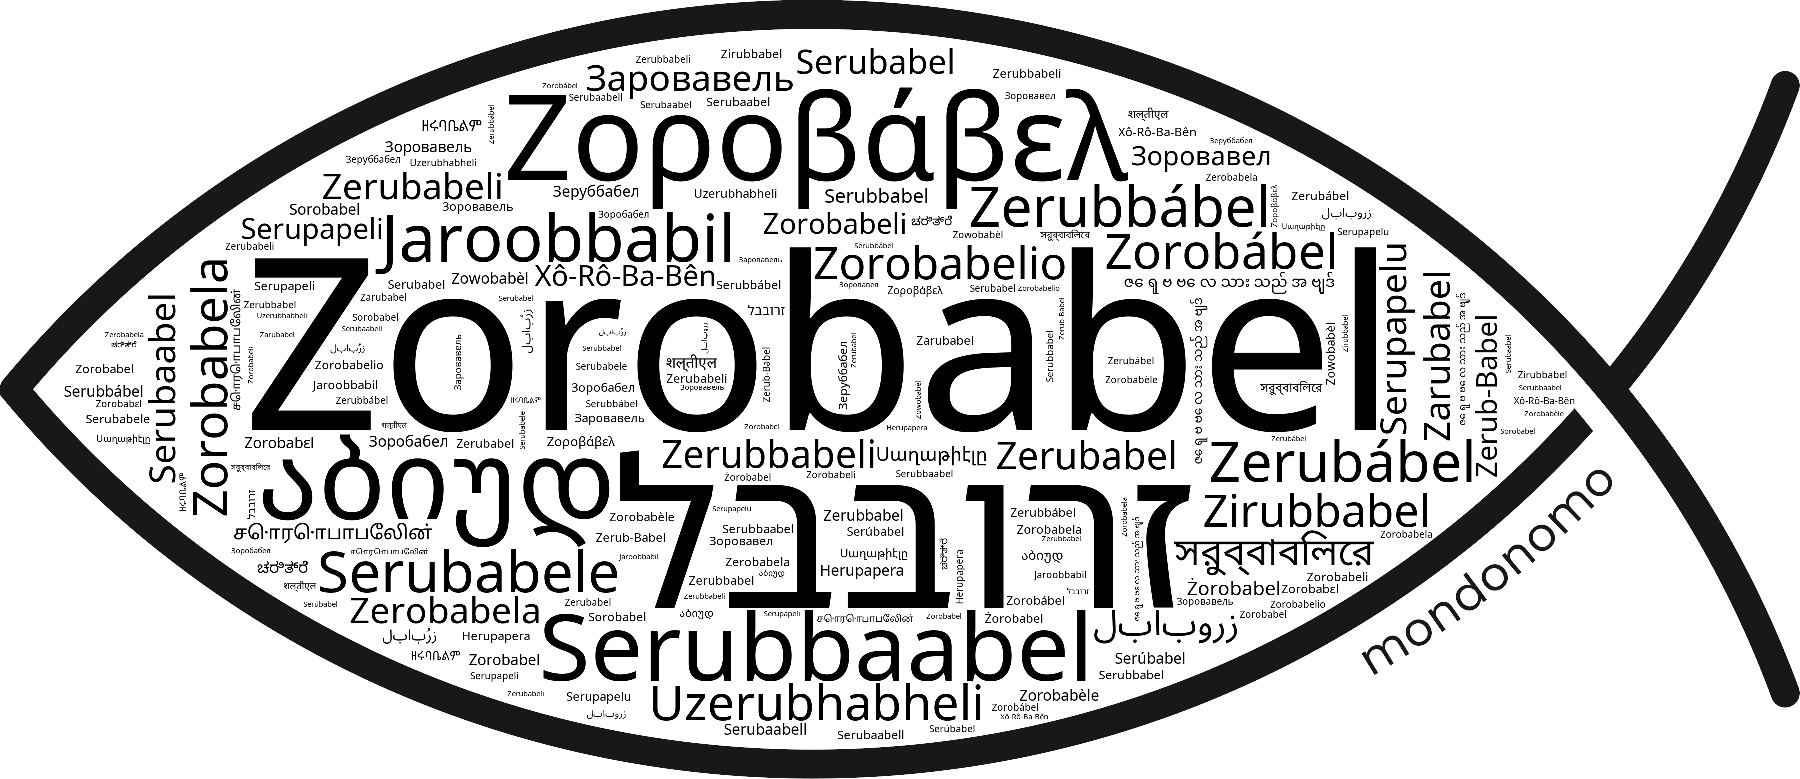 Name Zorobabel in the world's Bibles